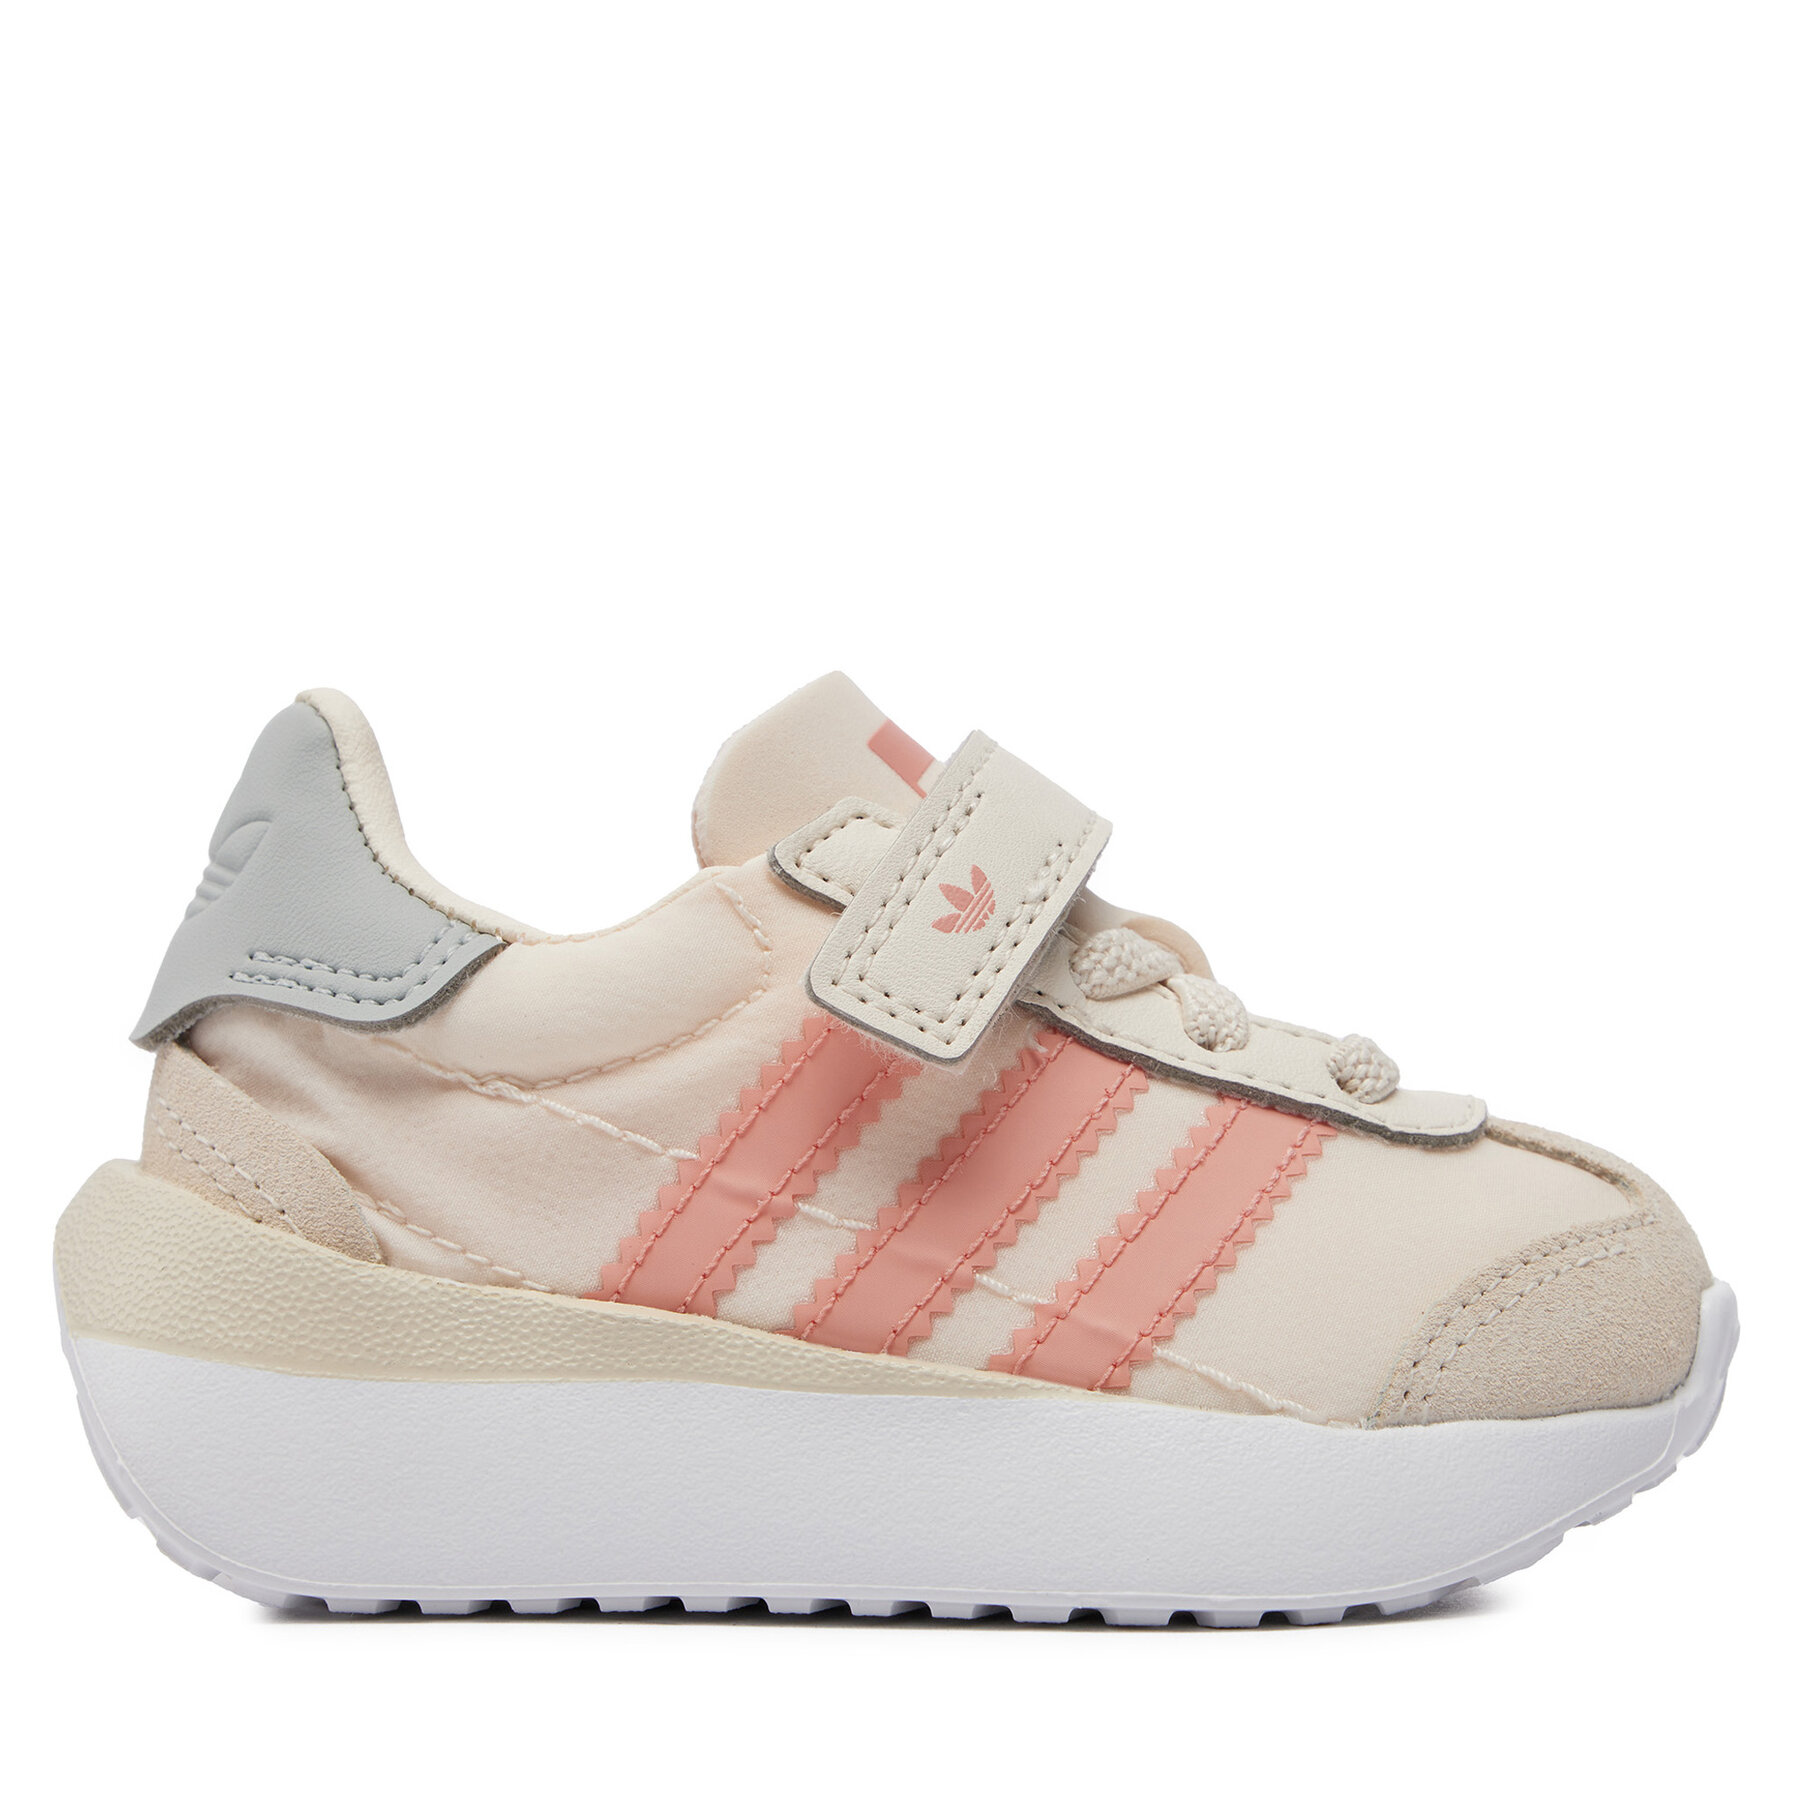 Sneakers adidas Country XLG Kids IF6151 Beige von Adidas